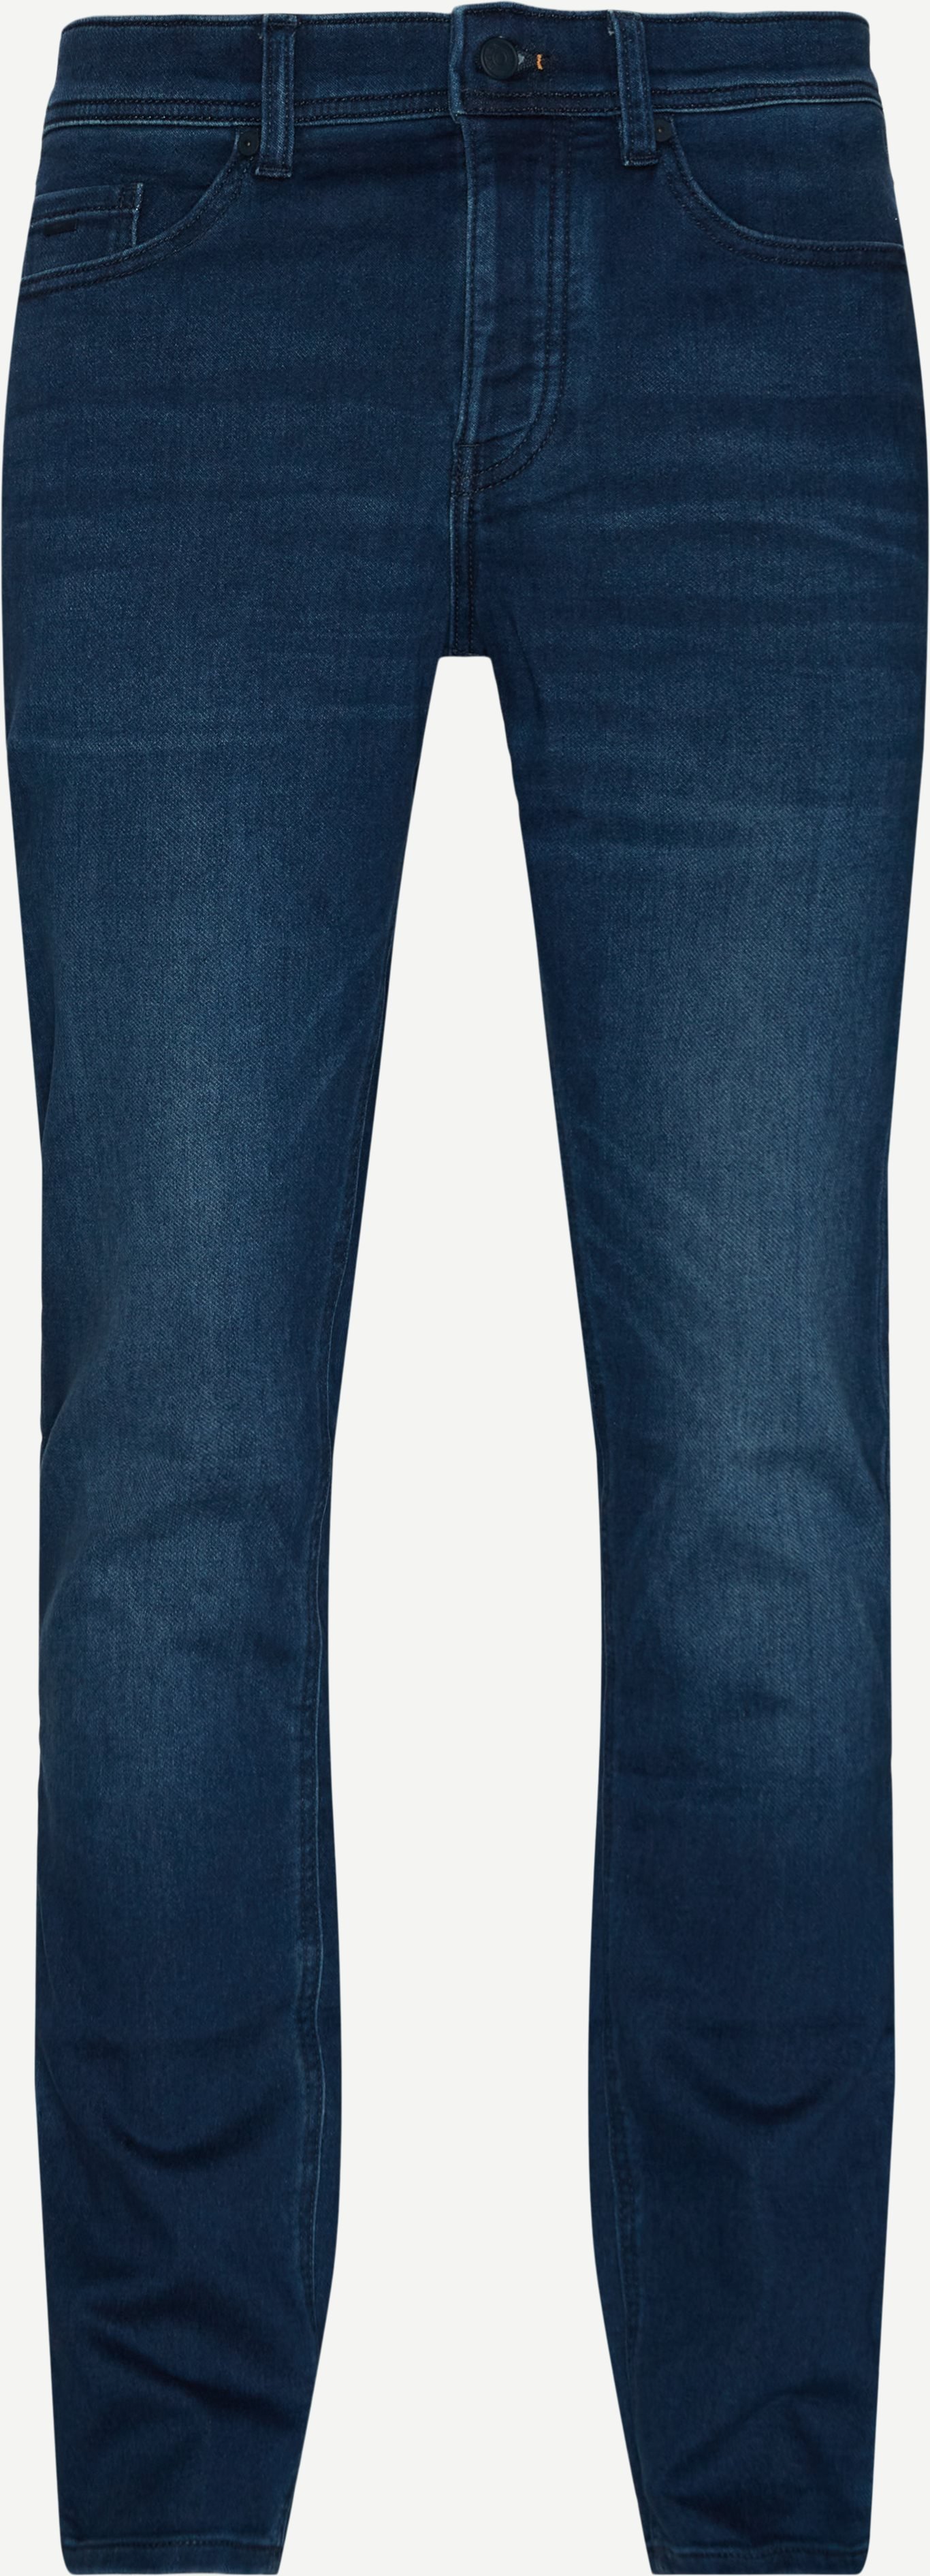 Taber BC-SP-1 Rehab Jeans - Jeans - Tapered fit - Denim